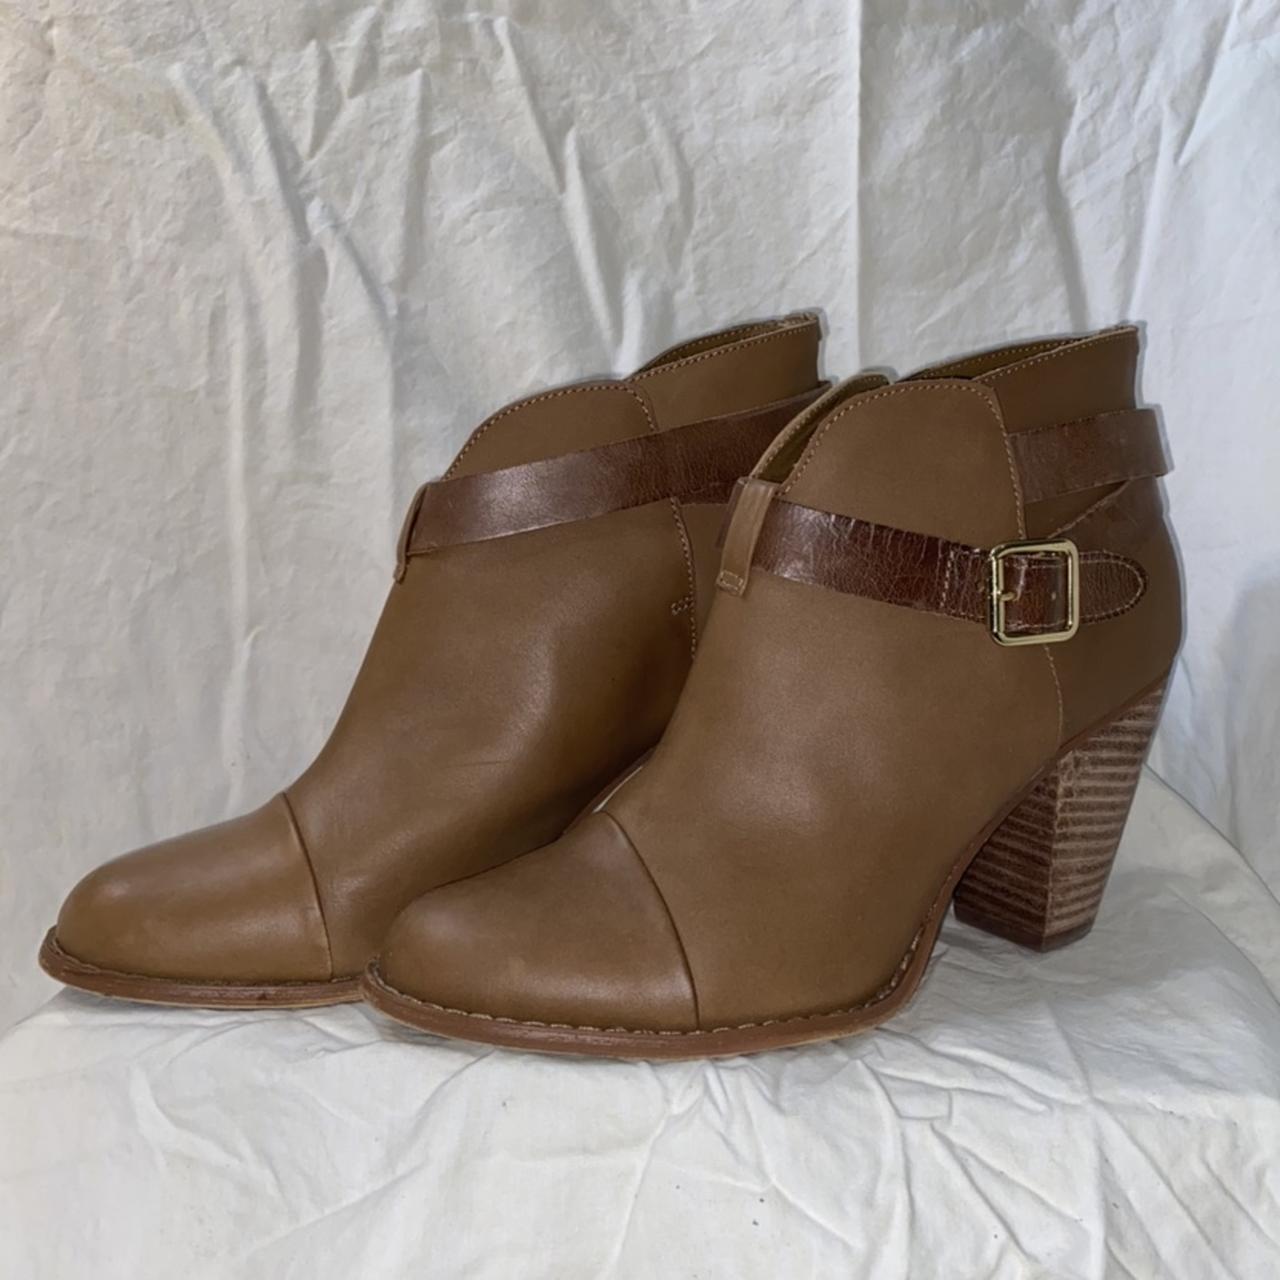 Adorable light brown leather ankle booties that go... - Depop